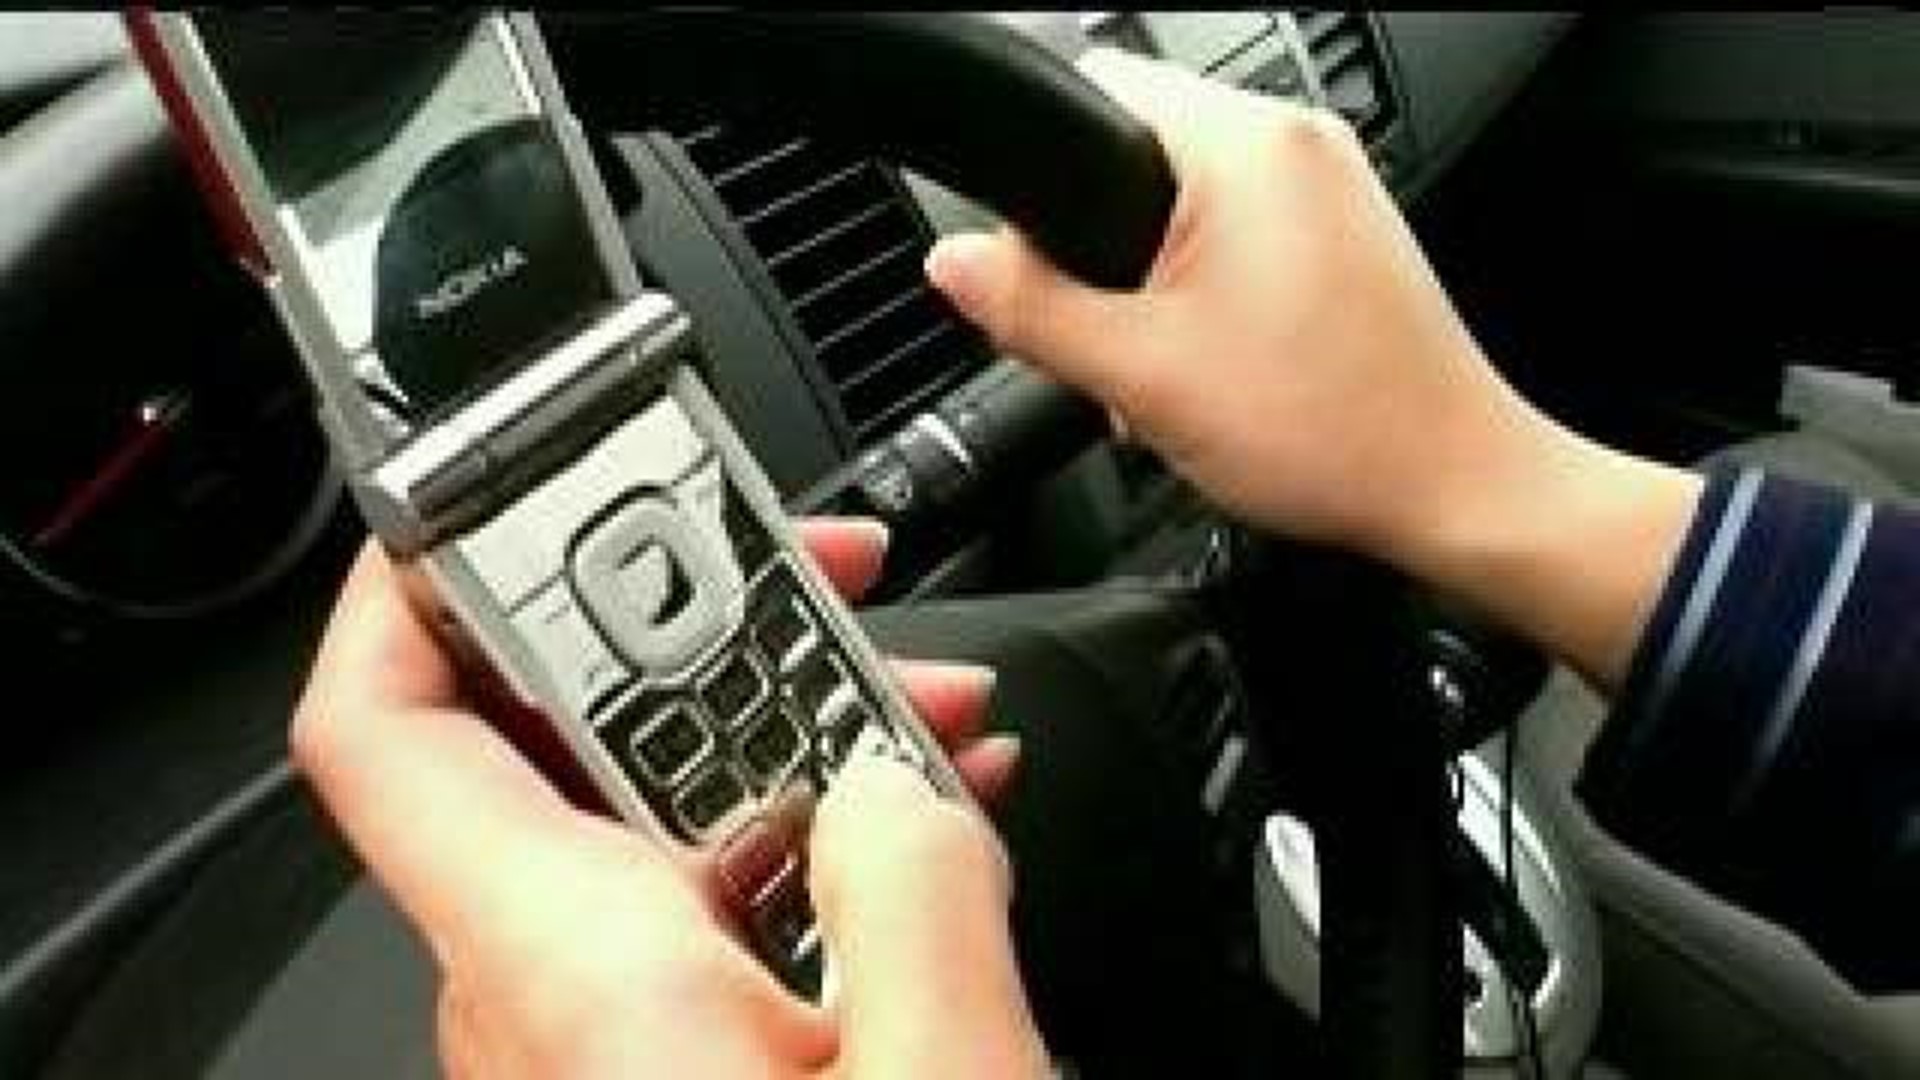 Bill proposes stricter enforcement on texting and driving